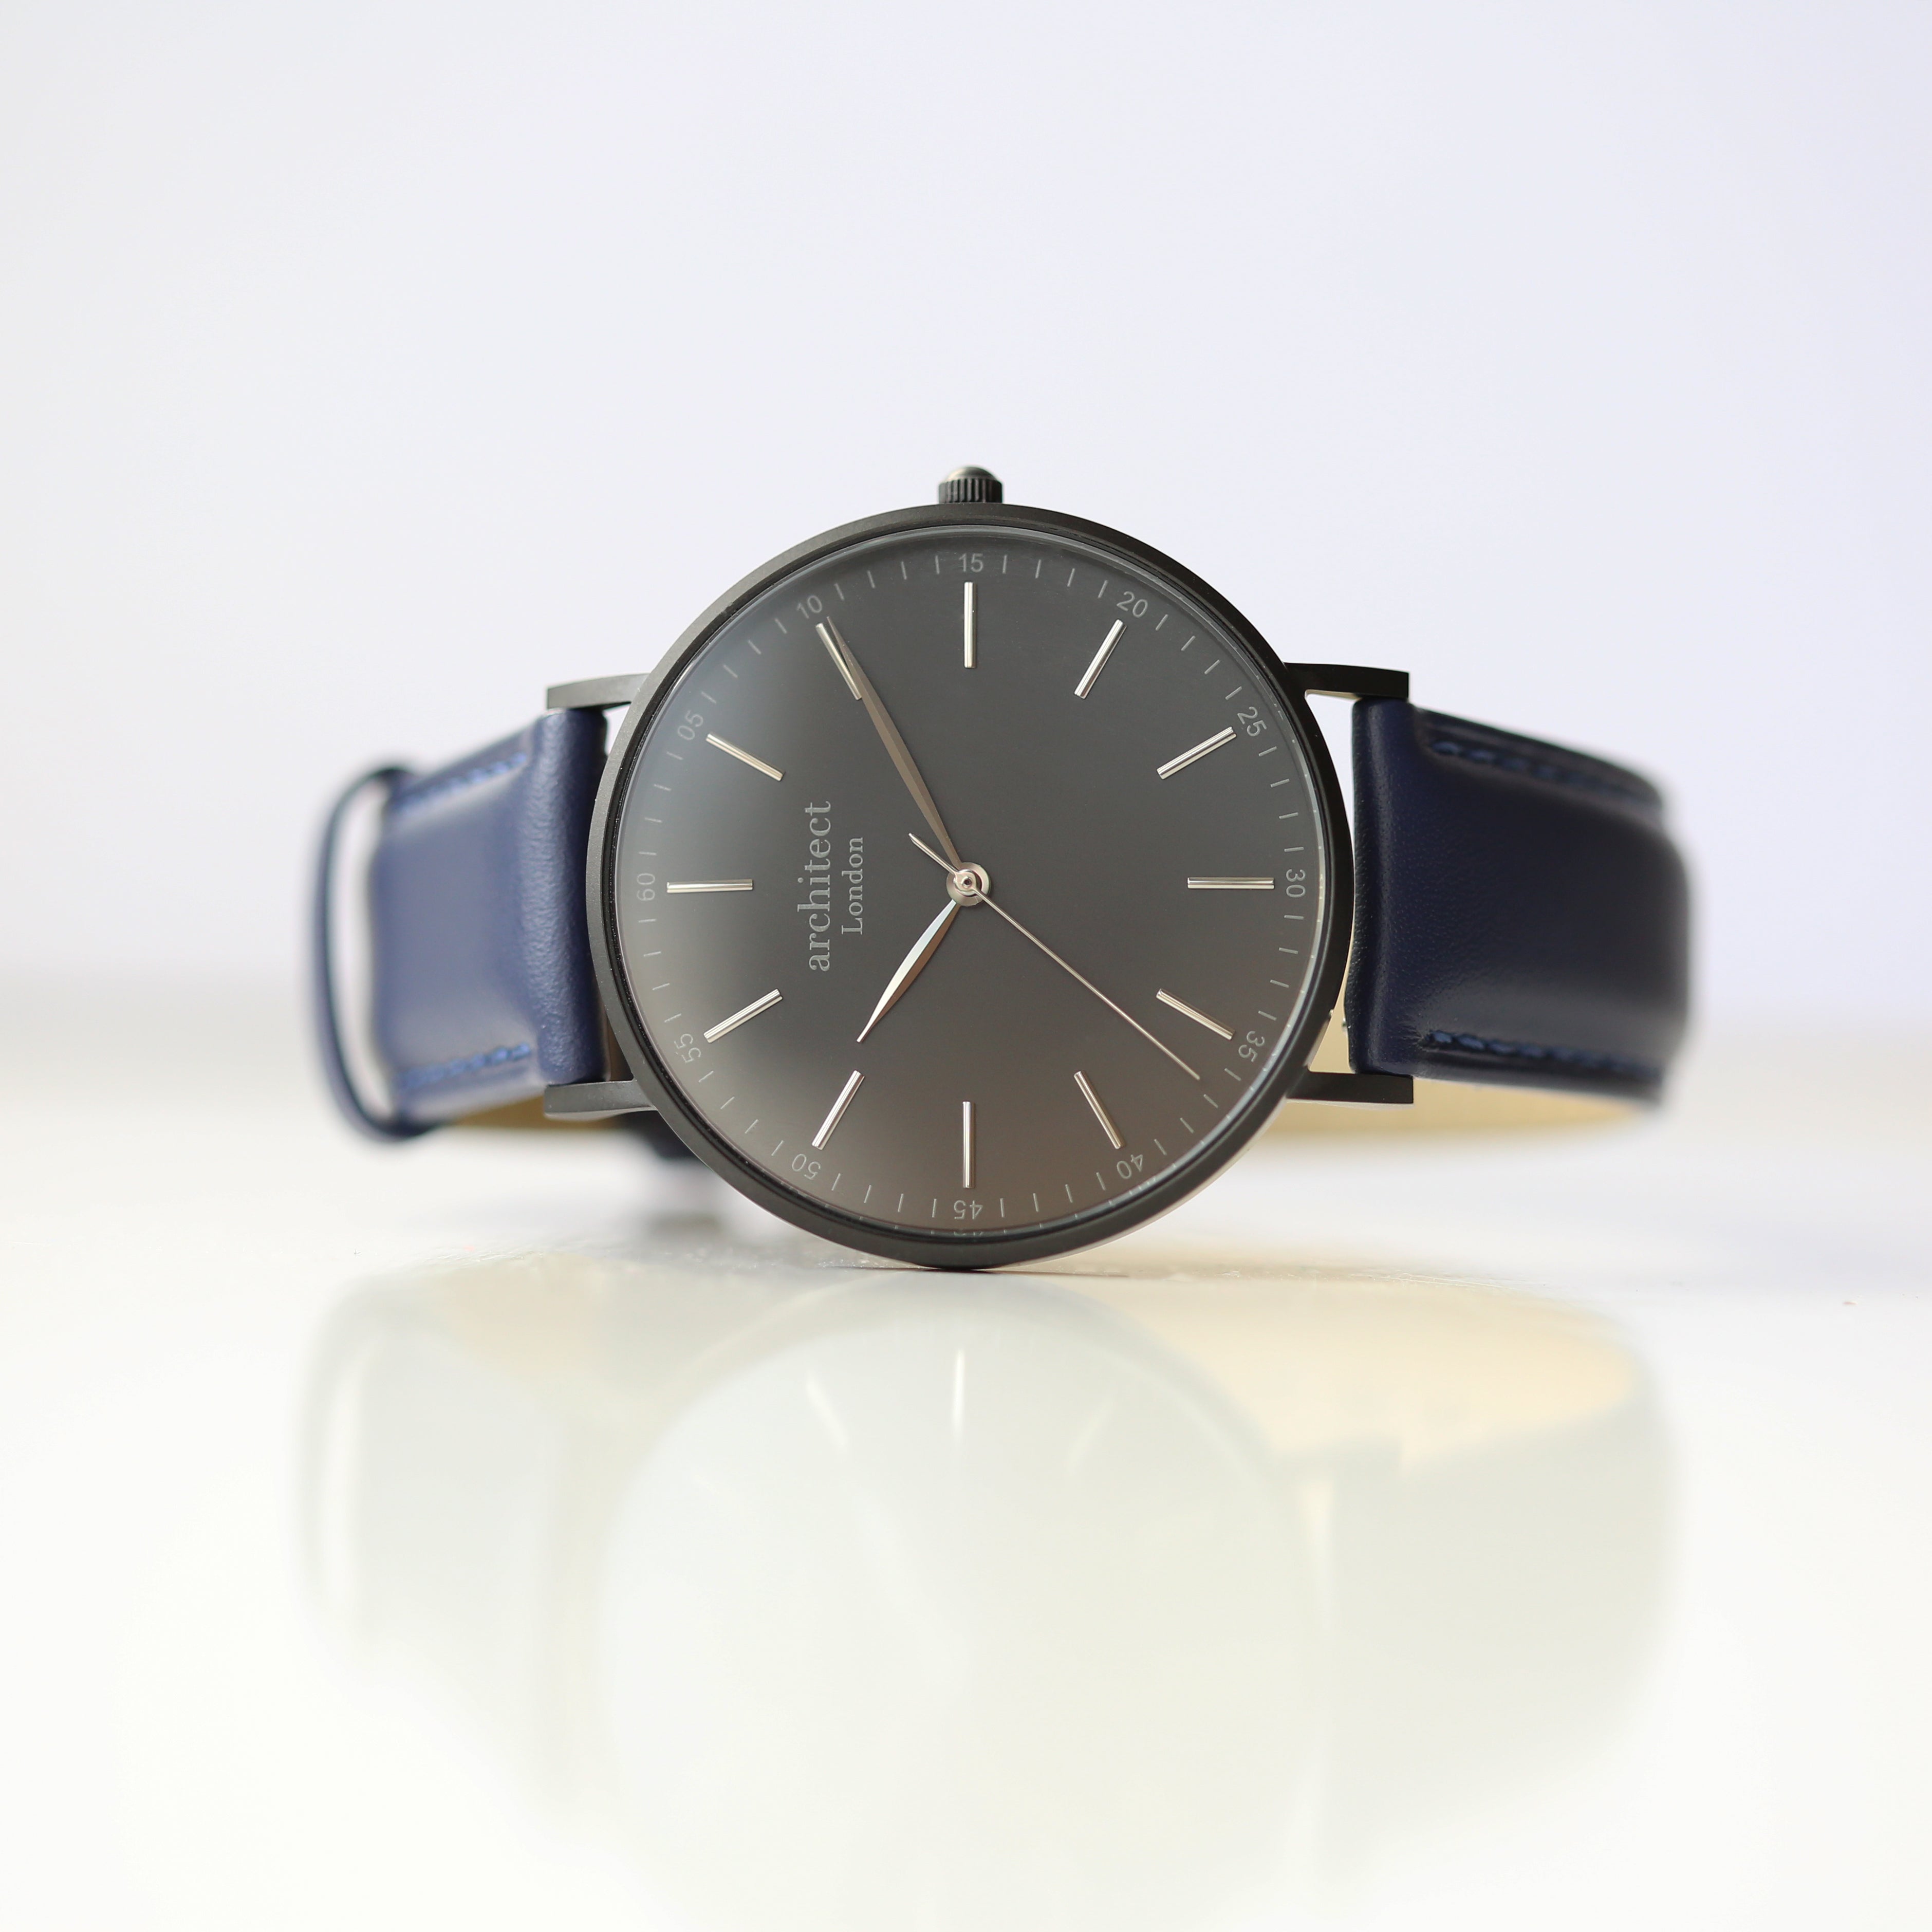 Contactless Payment Watch - Men's Architect Minimalist + Admiral Blue Strap + Own Handwriting Engraving